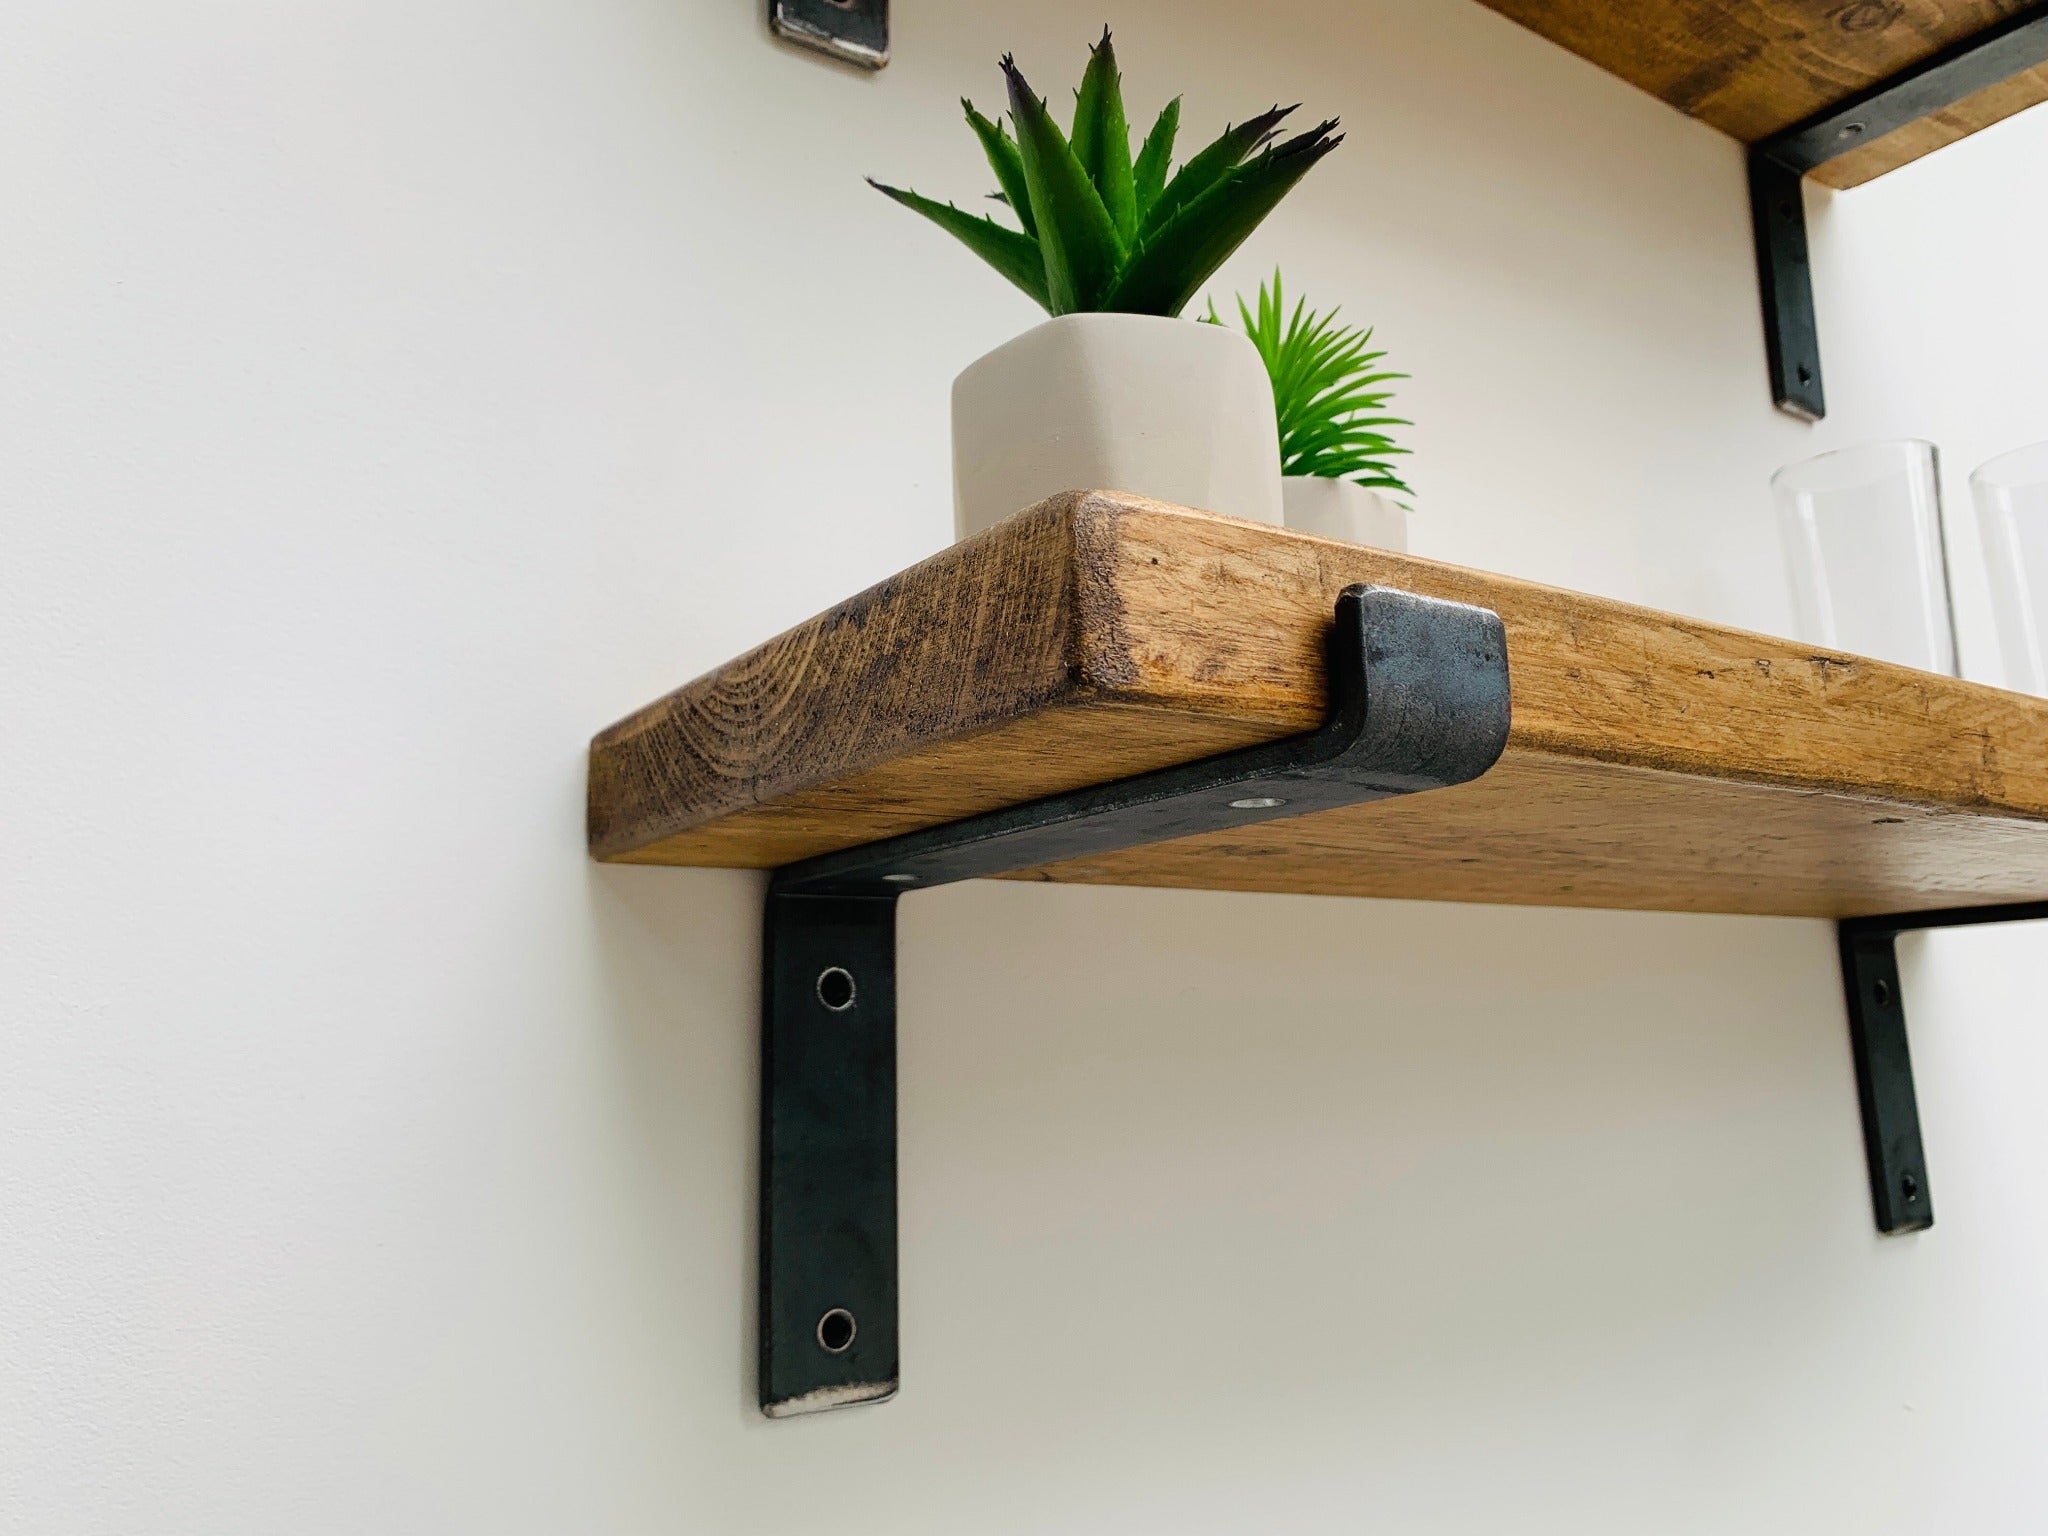 Rustic Reclaimed Wood Kitchen Shelf with Industrial Lipped Metal Brackets